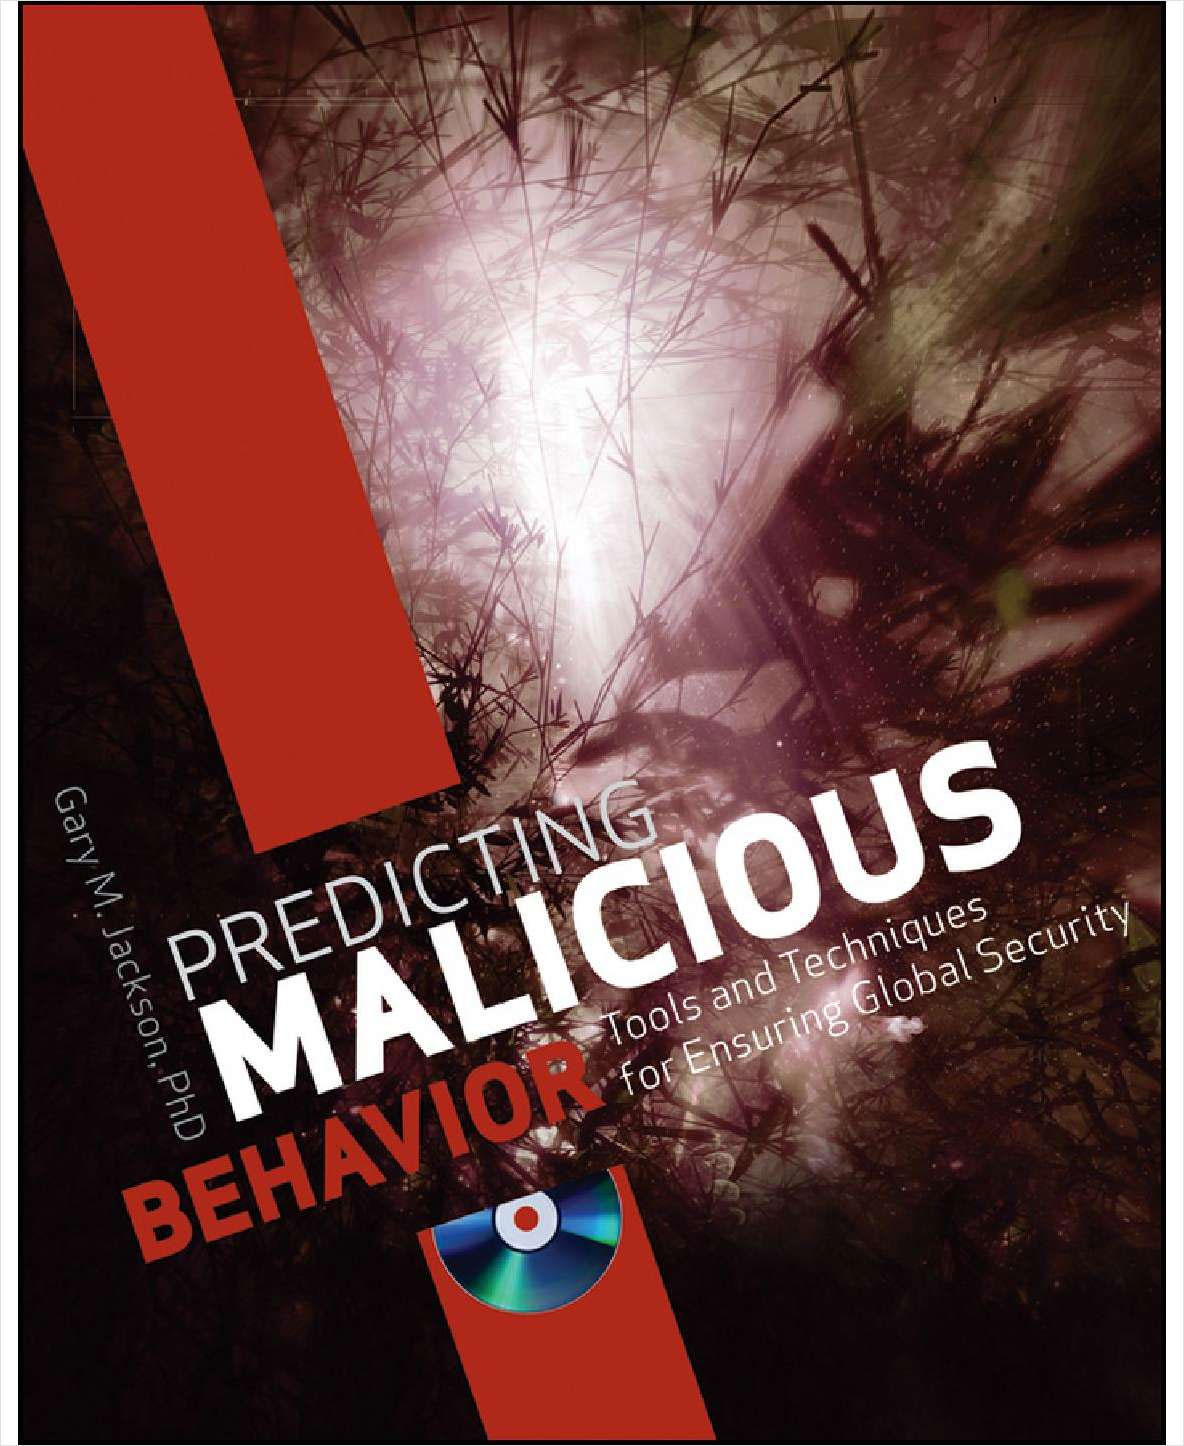 Predicting Malicious Behavior: Tools and Techniques for Ensuring Global Security (Free Sample Chapter) Screenshot